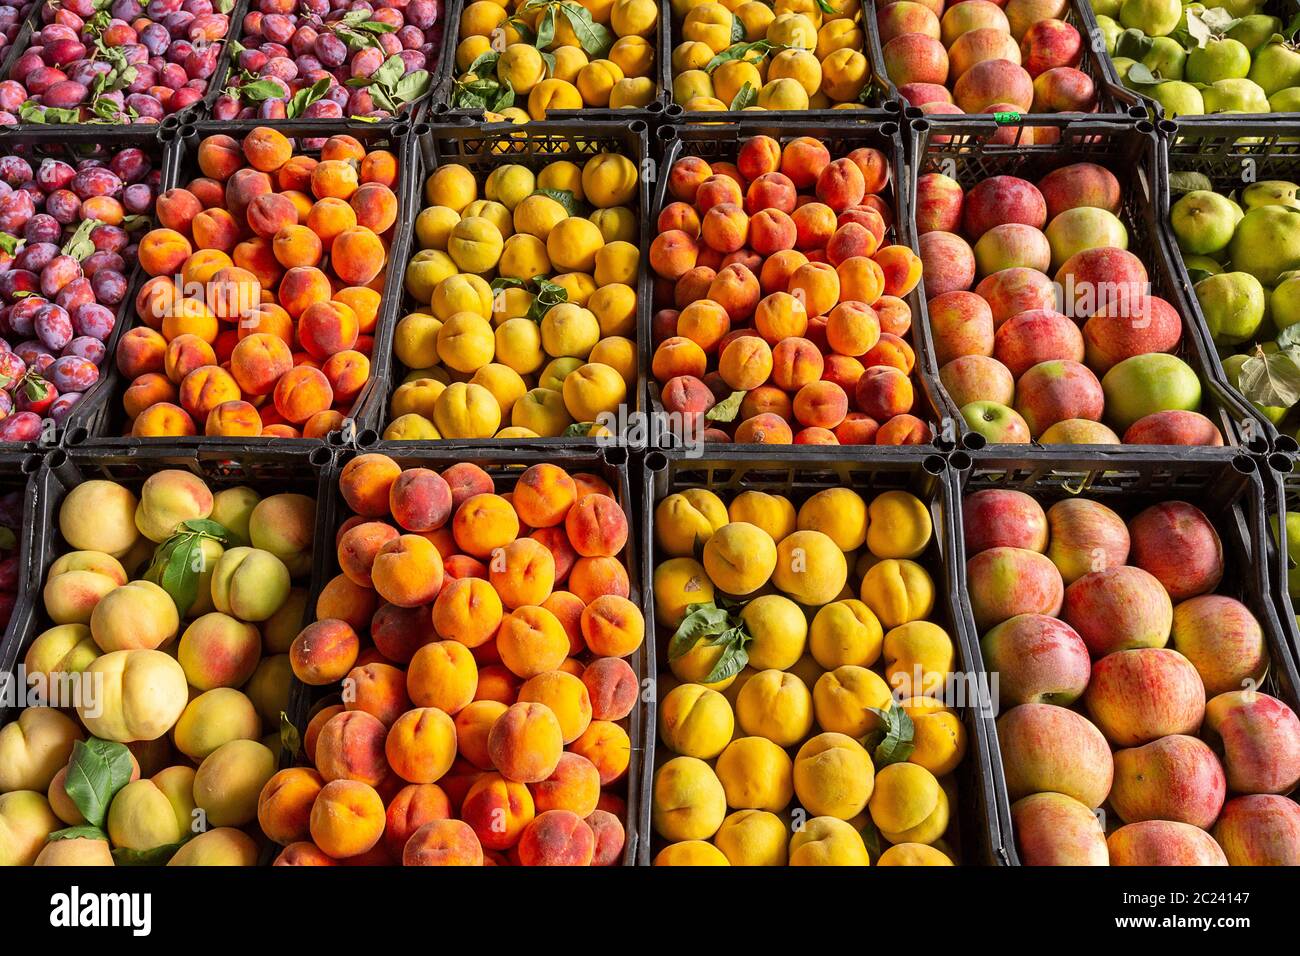 Variety of fruits in the market Stock Photo